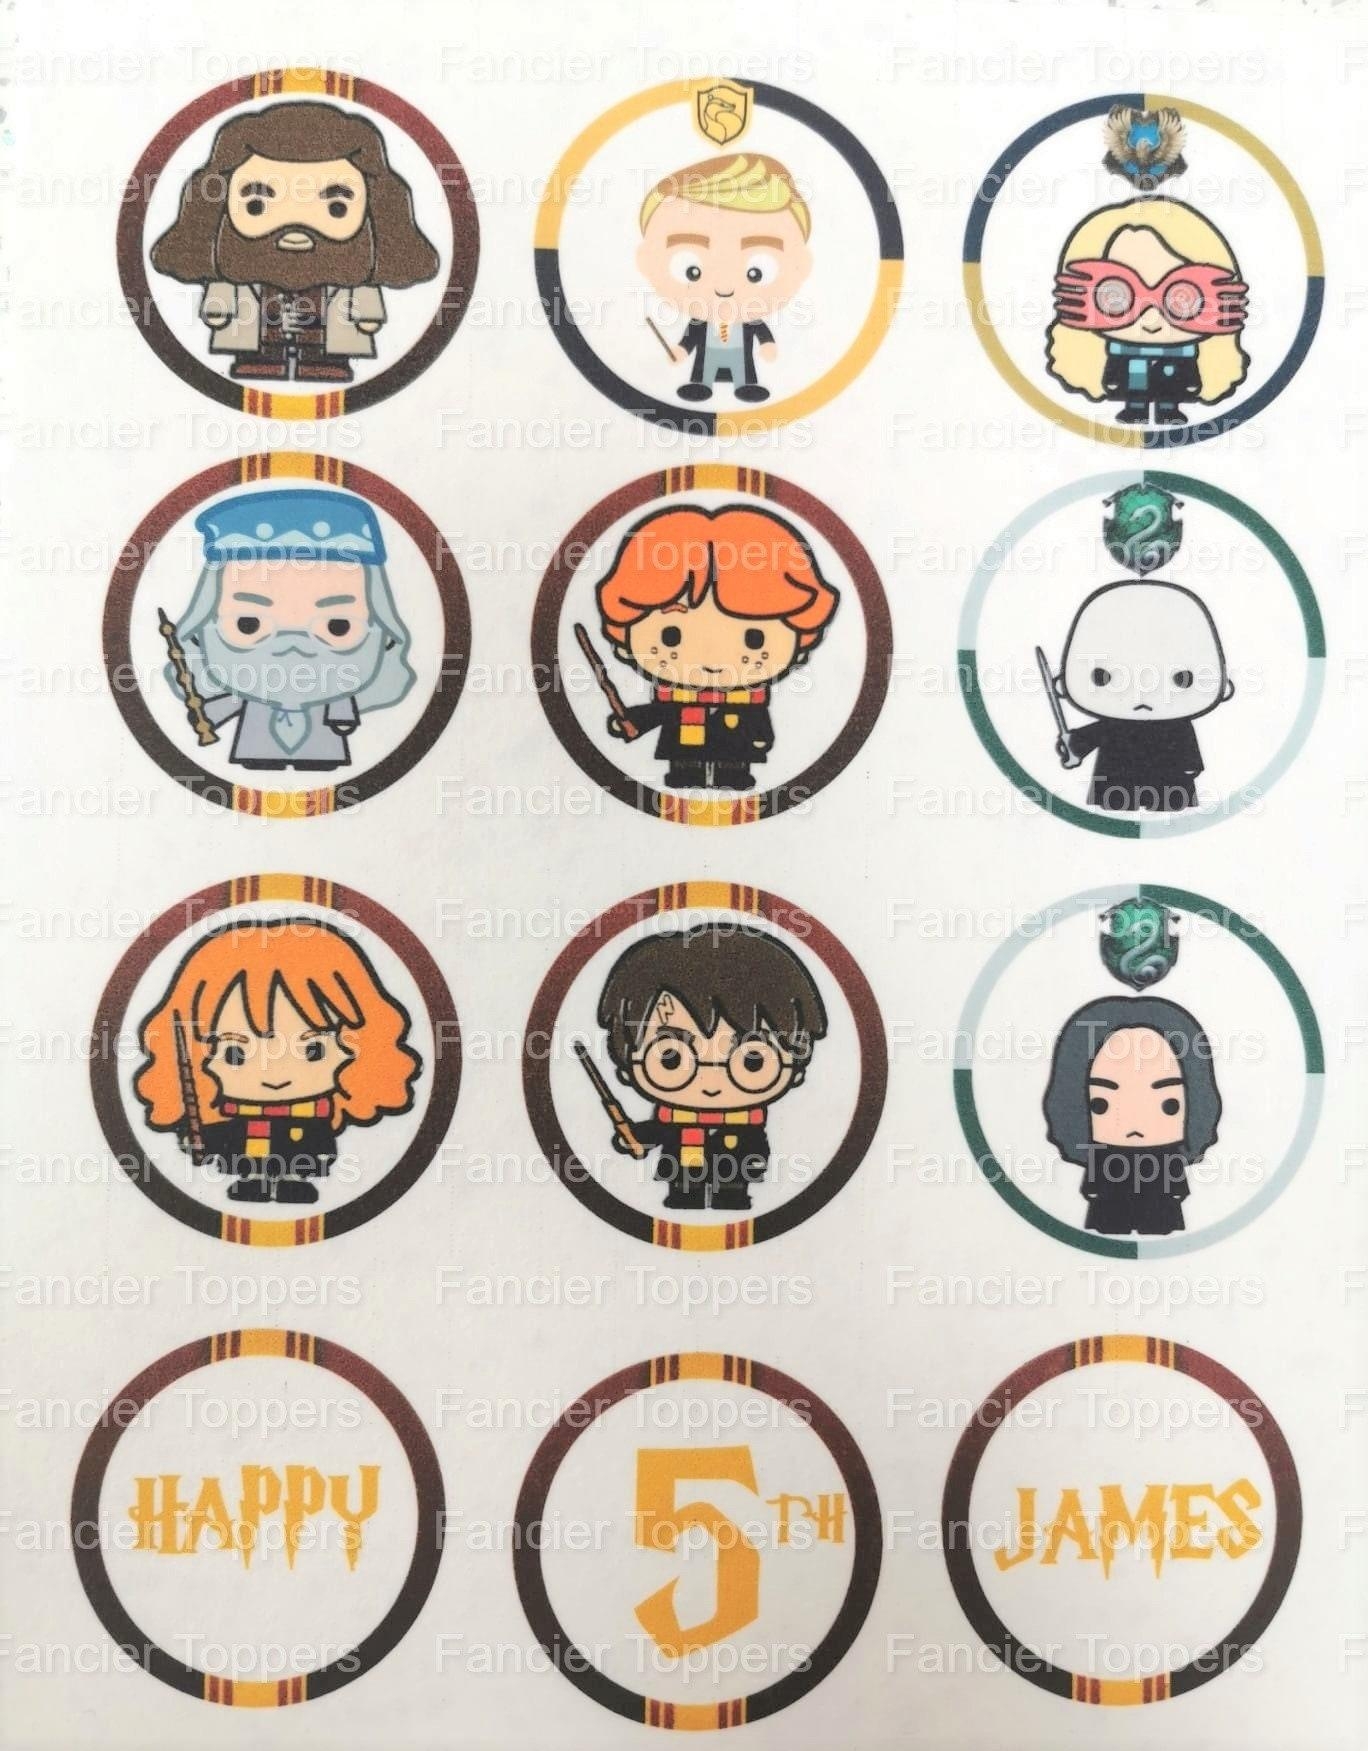 Harry Potter Cupcake Toppers Printable